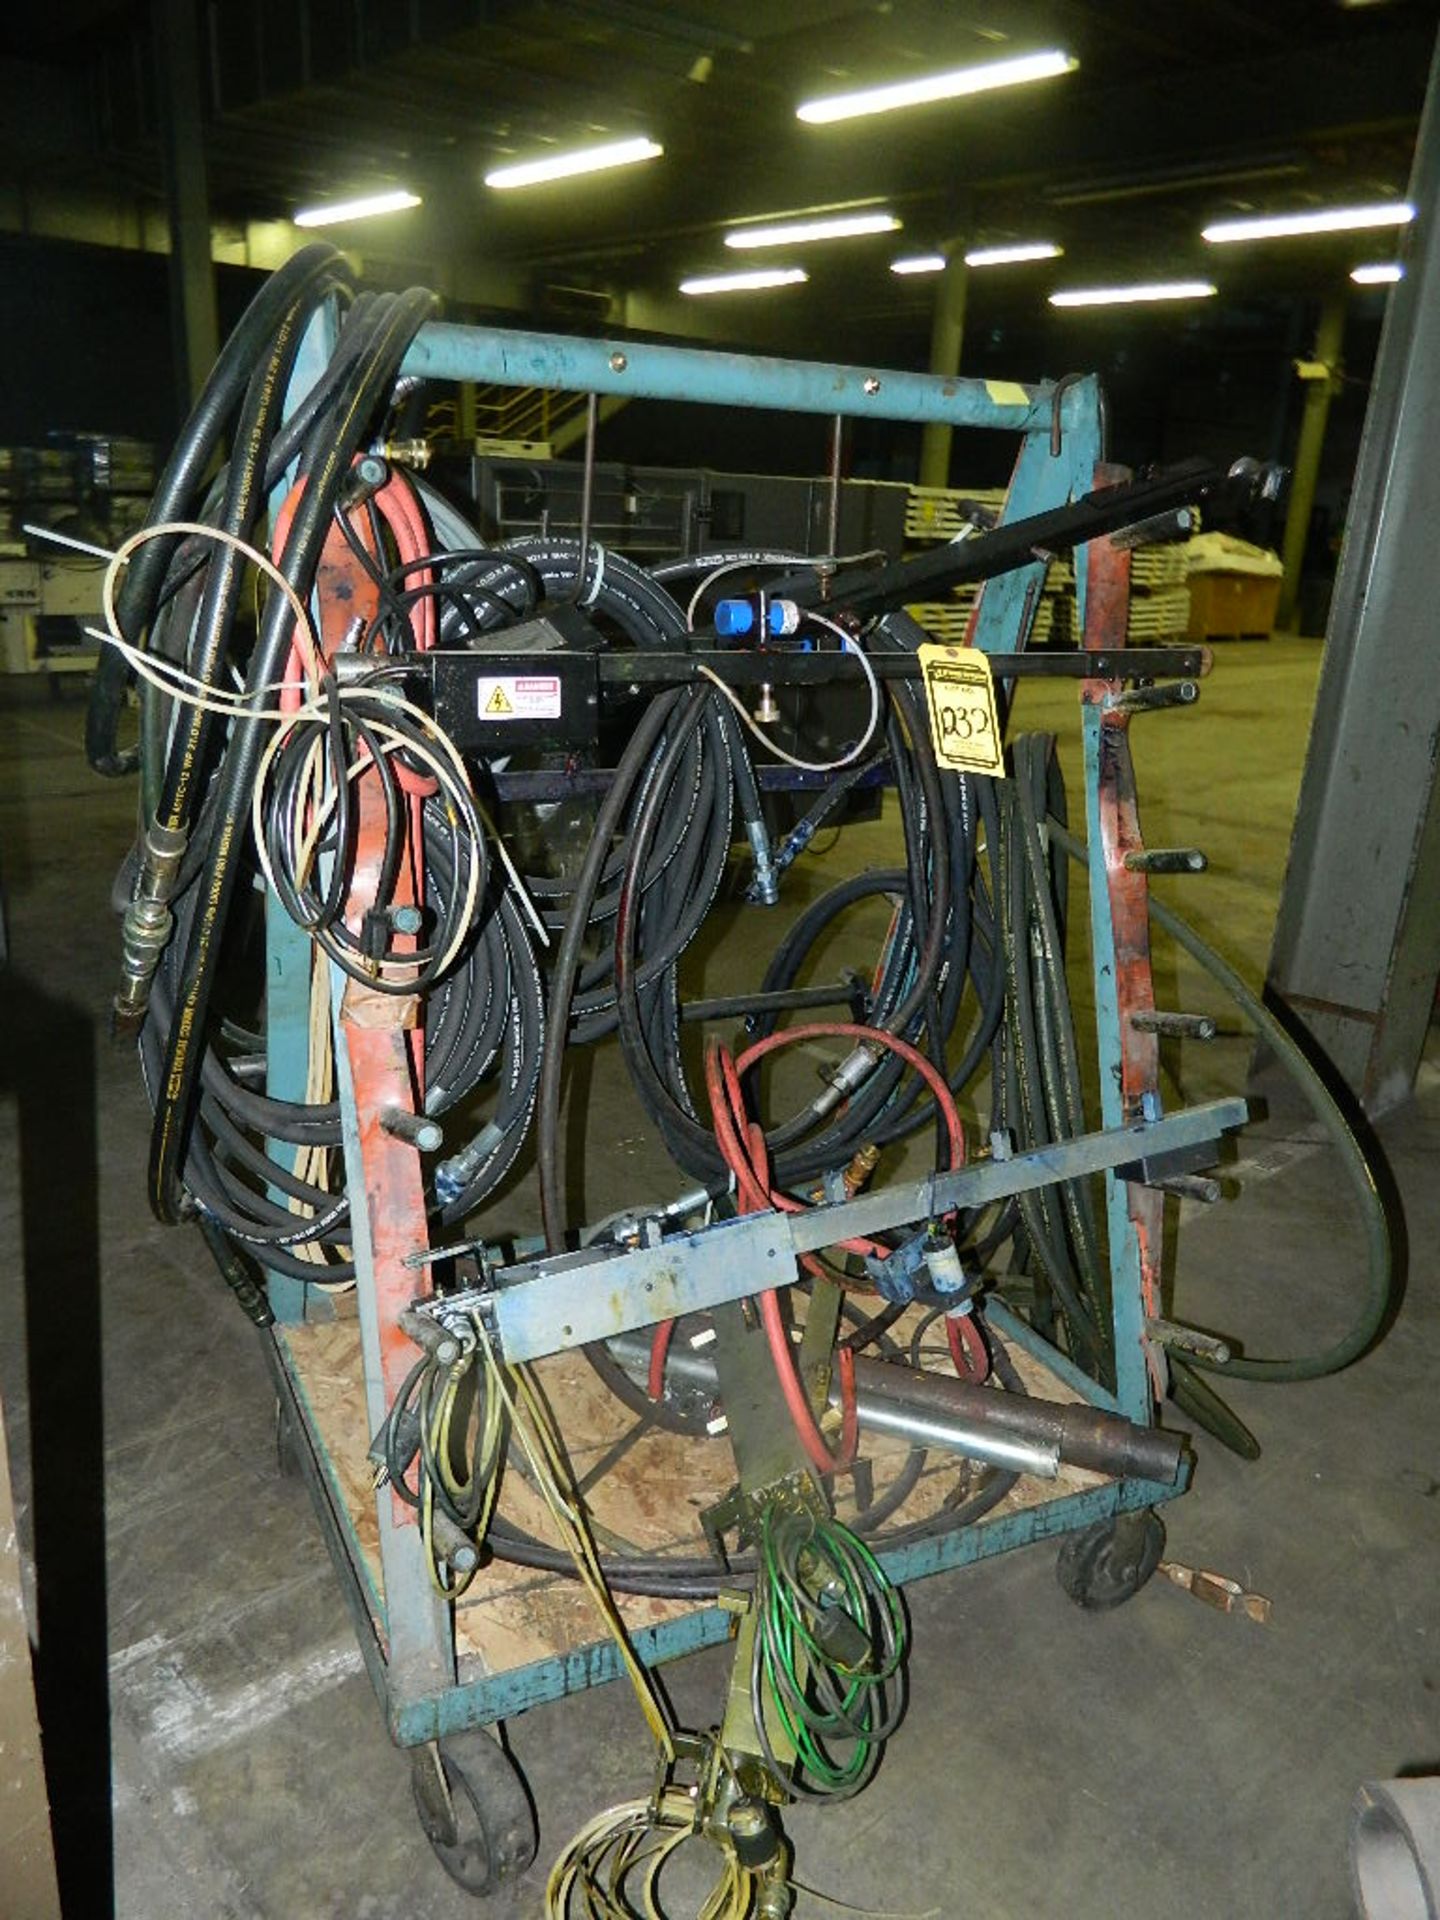 RACK & CONTENTS OF HOSE